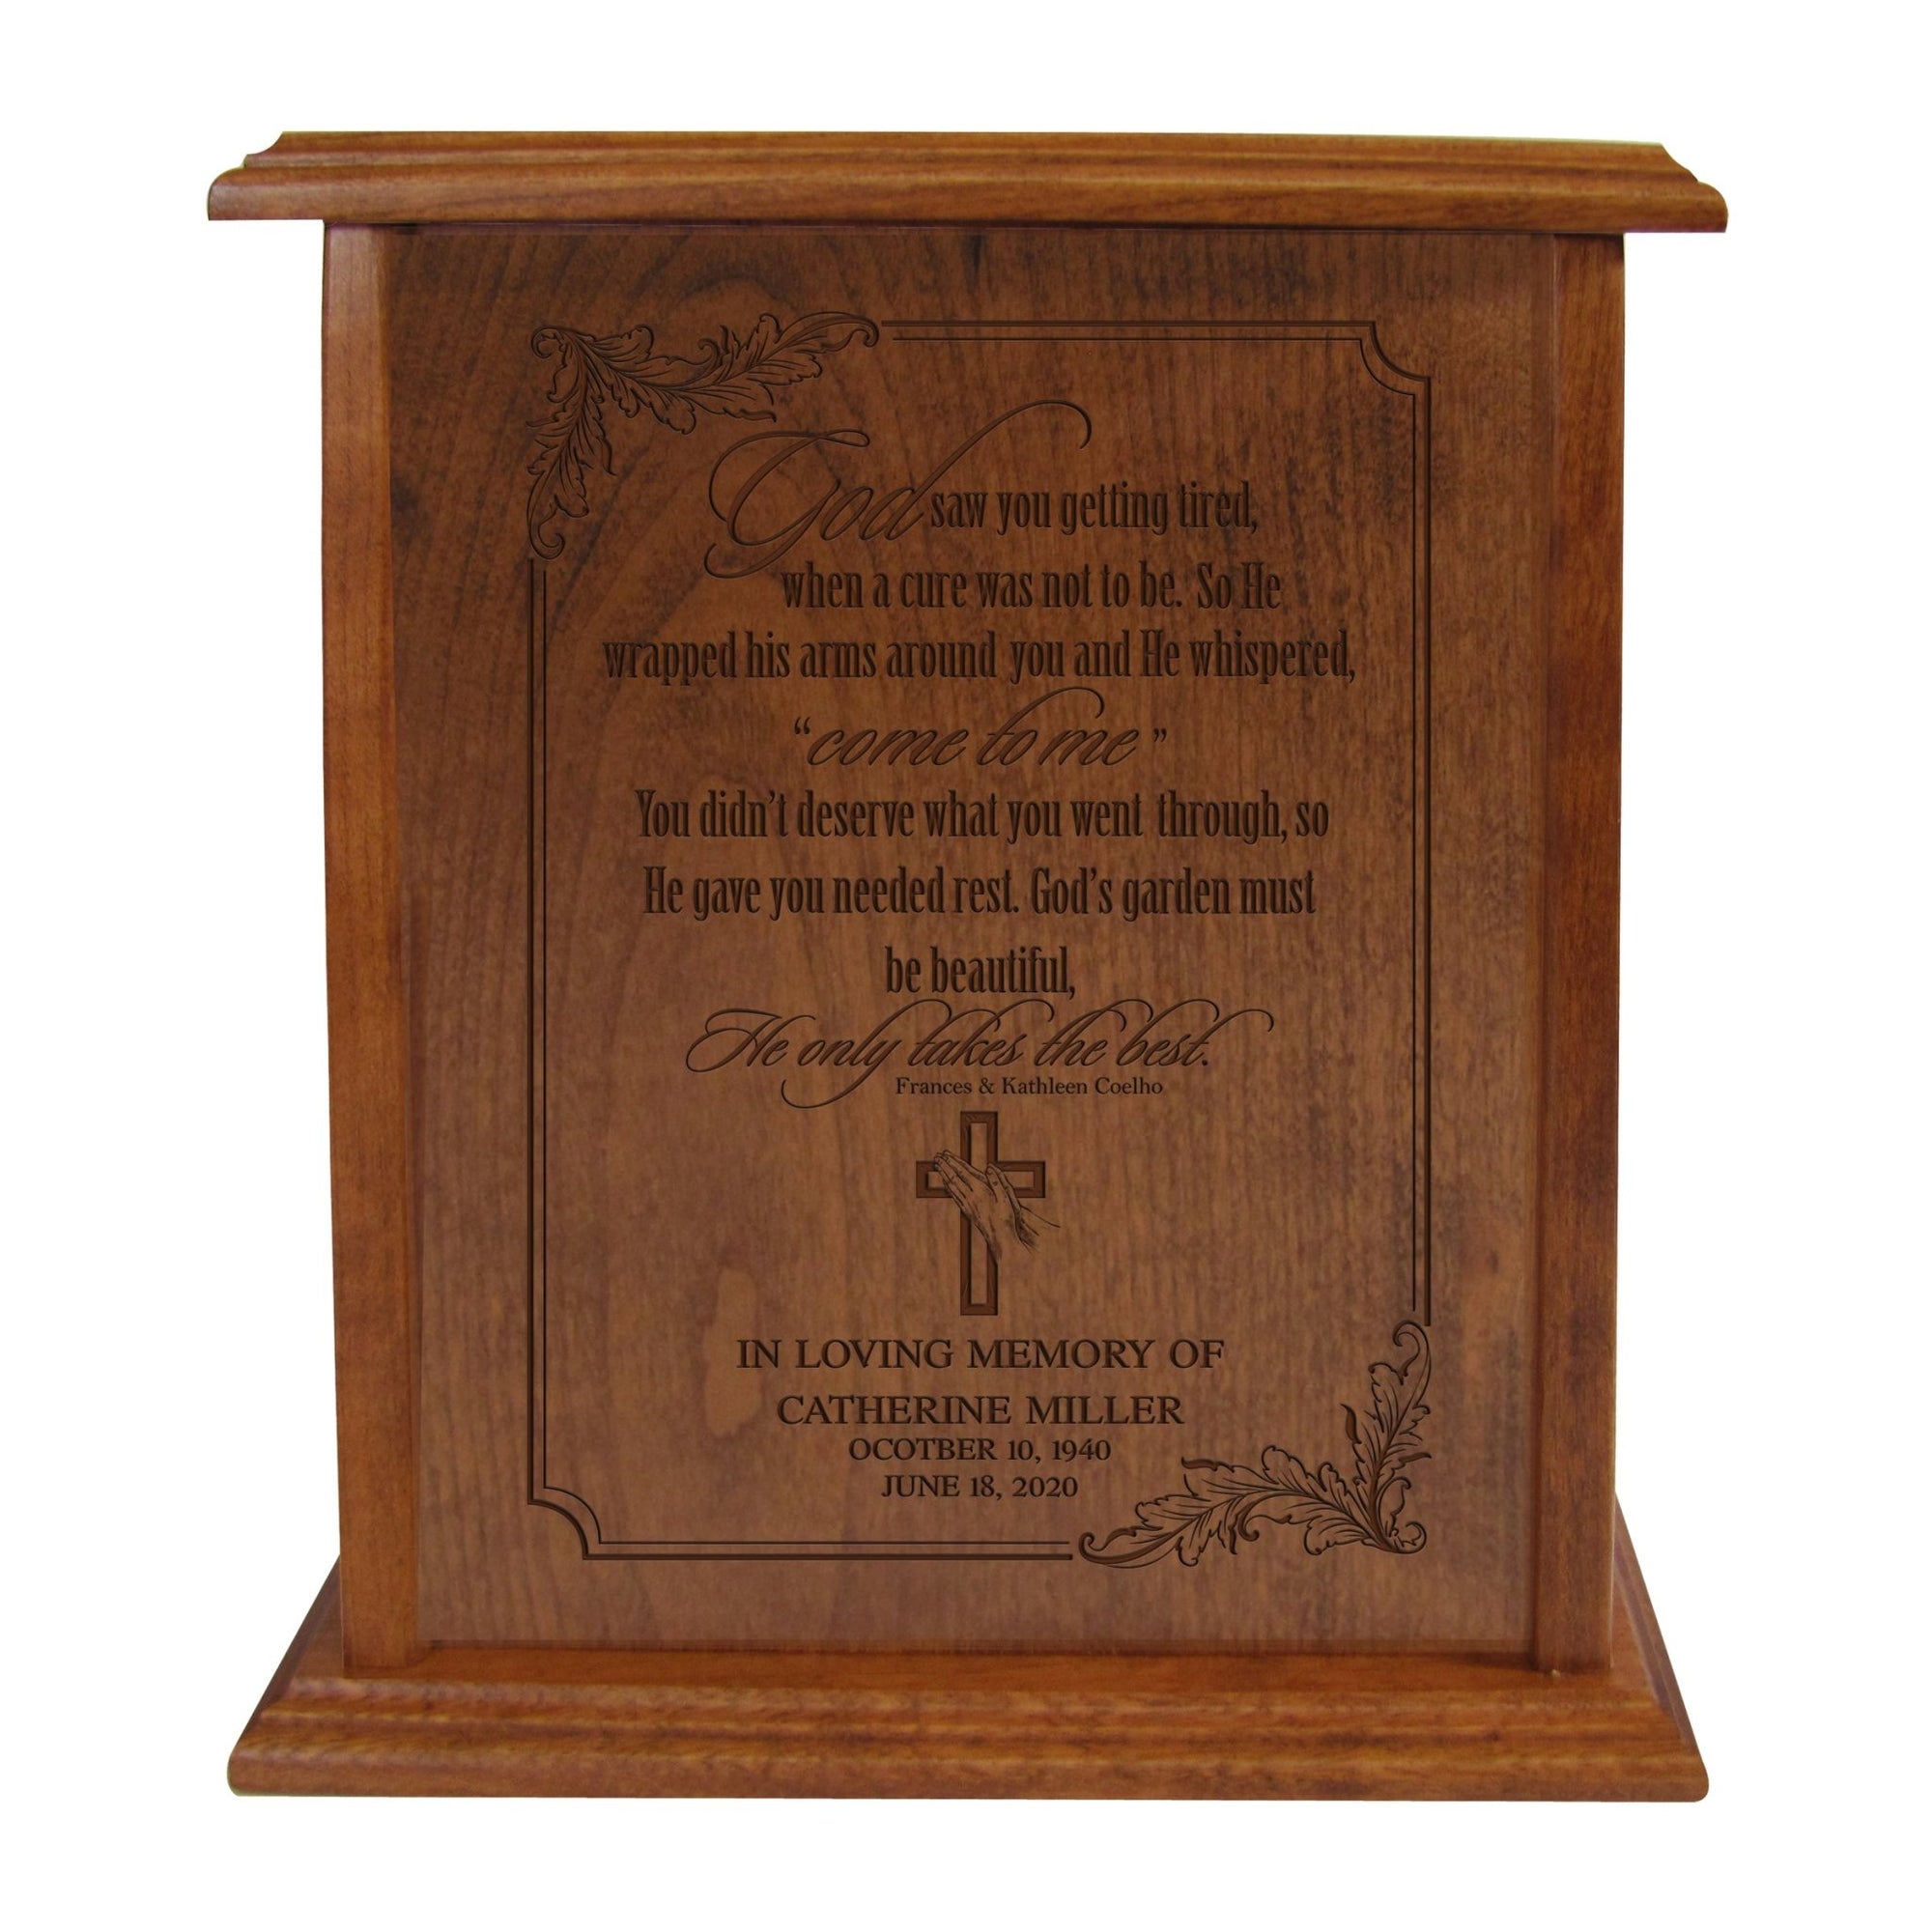 Custom Engraved Memorial Cherry Cremation Urn Box Holds 272 Cu Inches of Human Ashes - God saw you getting tired - LifeSong Milestones